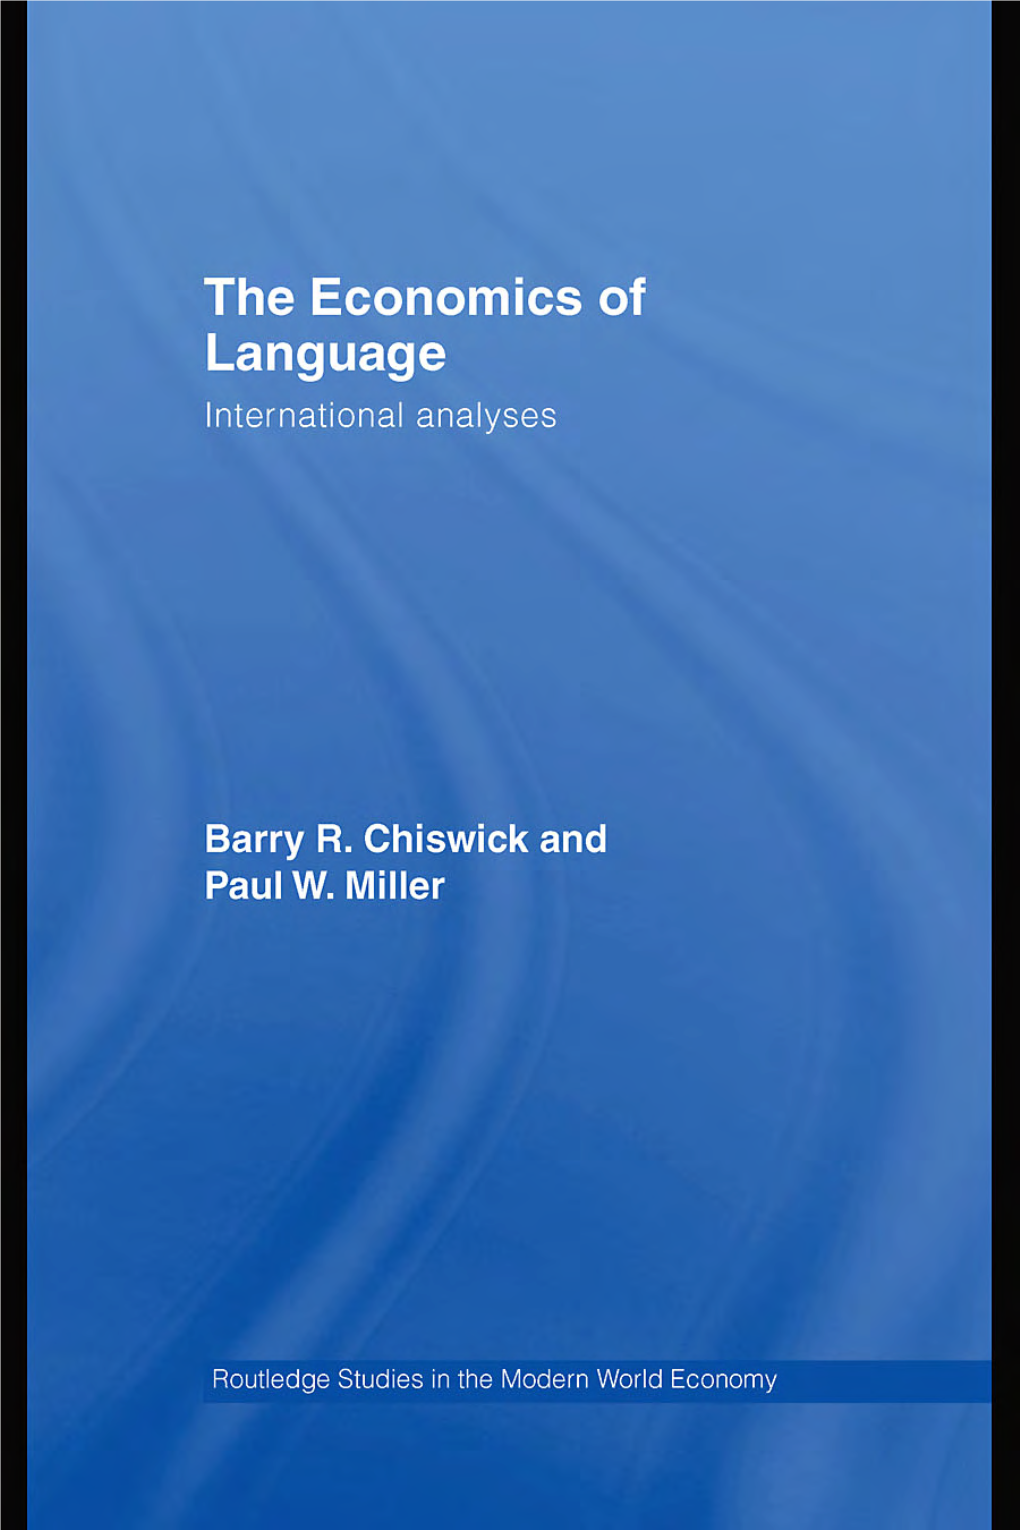 The Economics of Language: International Analyses, Barry Chiswick and Paul Miller Have Put Together Their ﬁnest Articles on the Topic